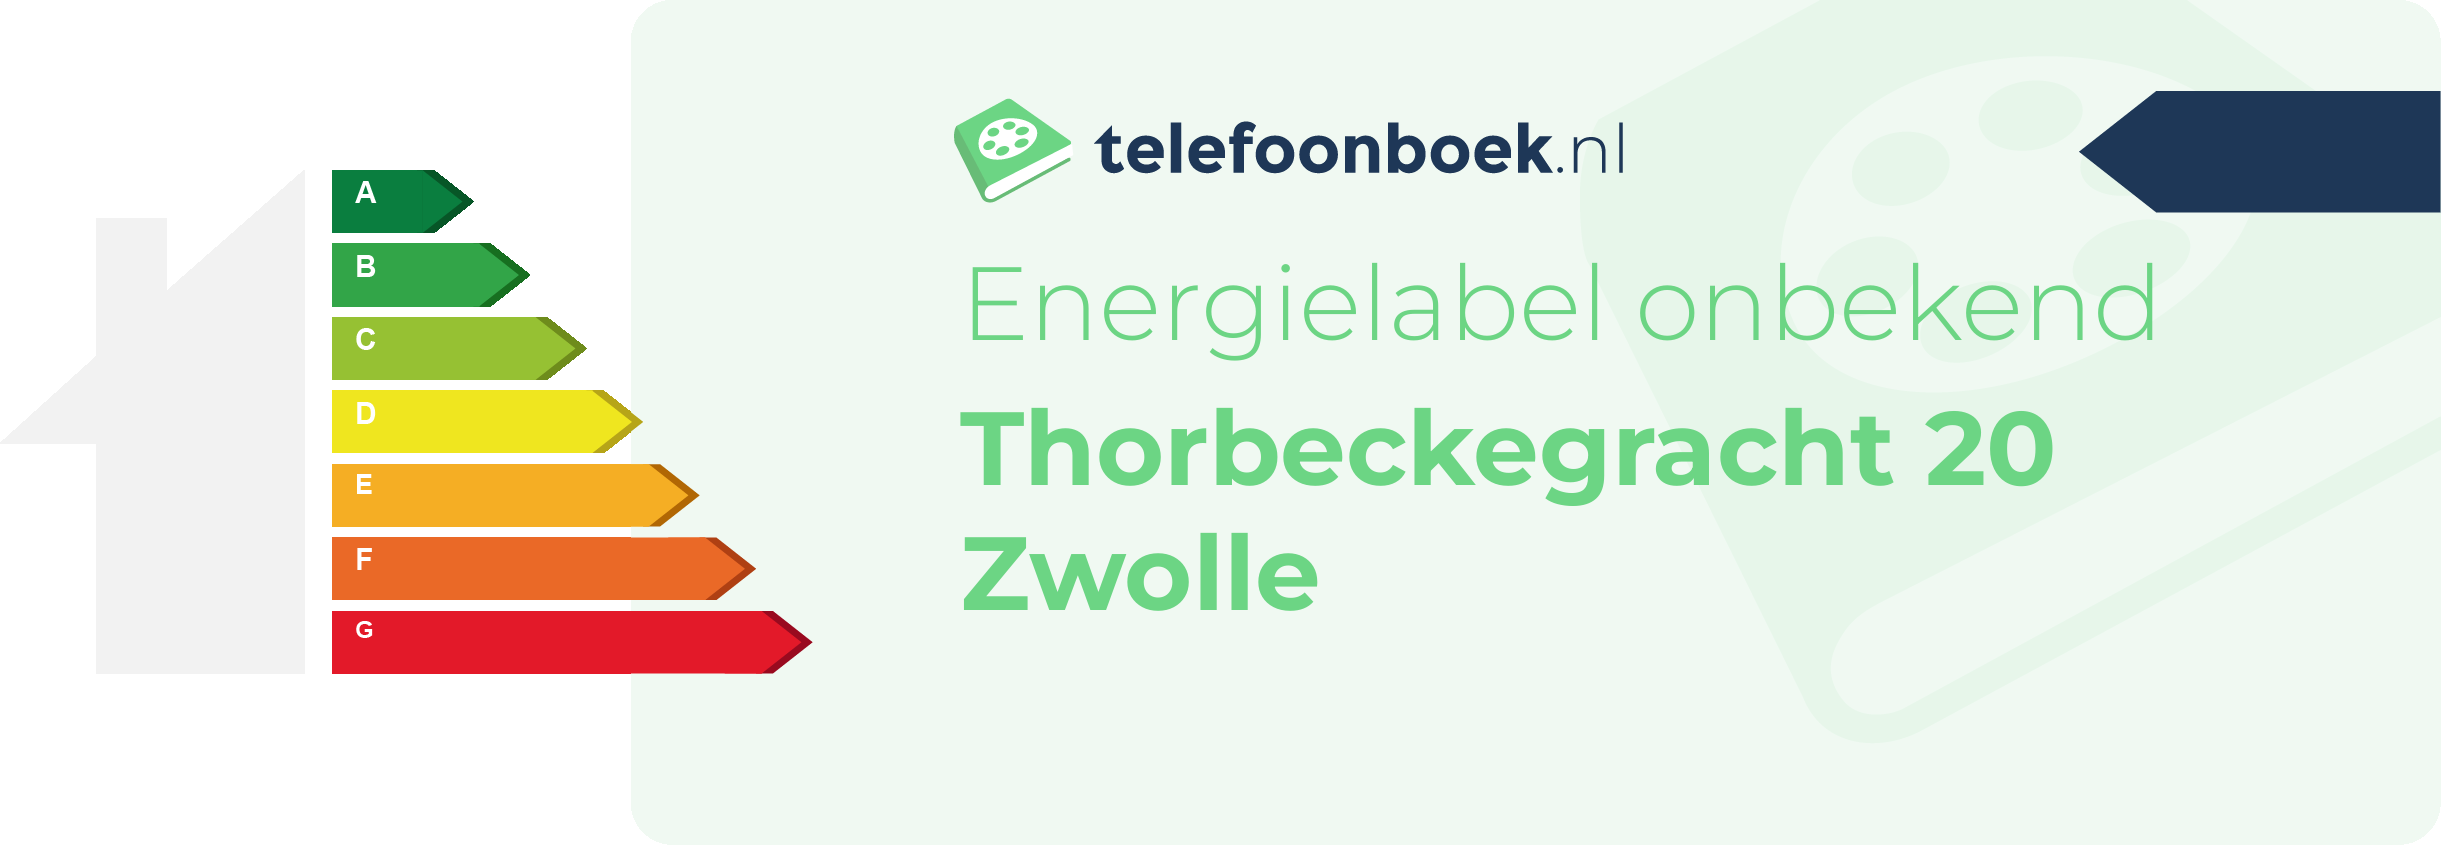 Energielabel Thorbeckegracht 20 Zwolle